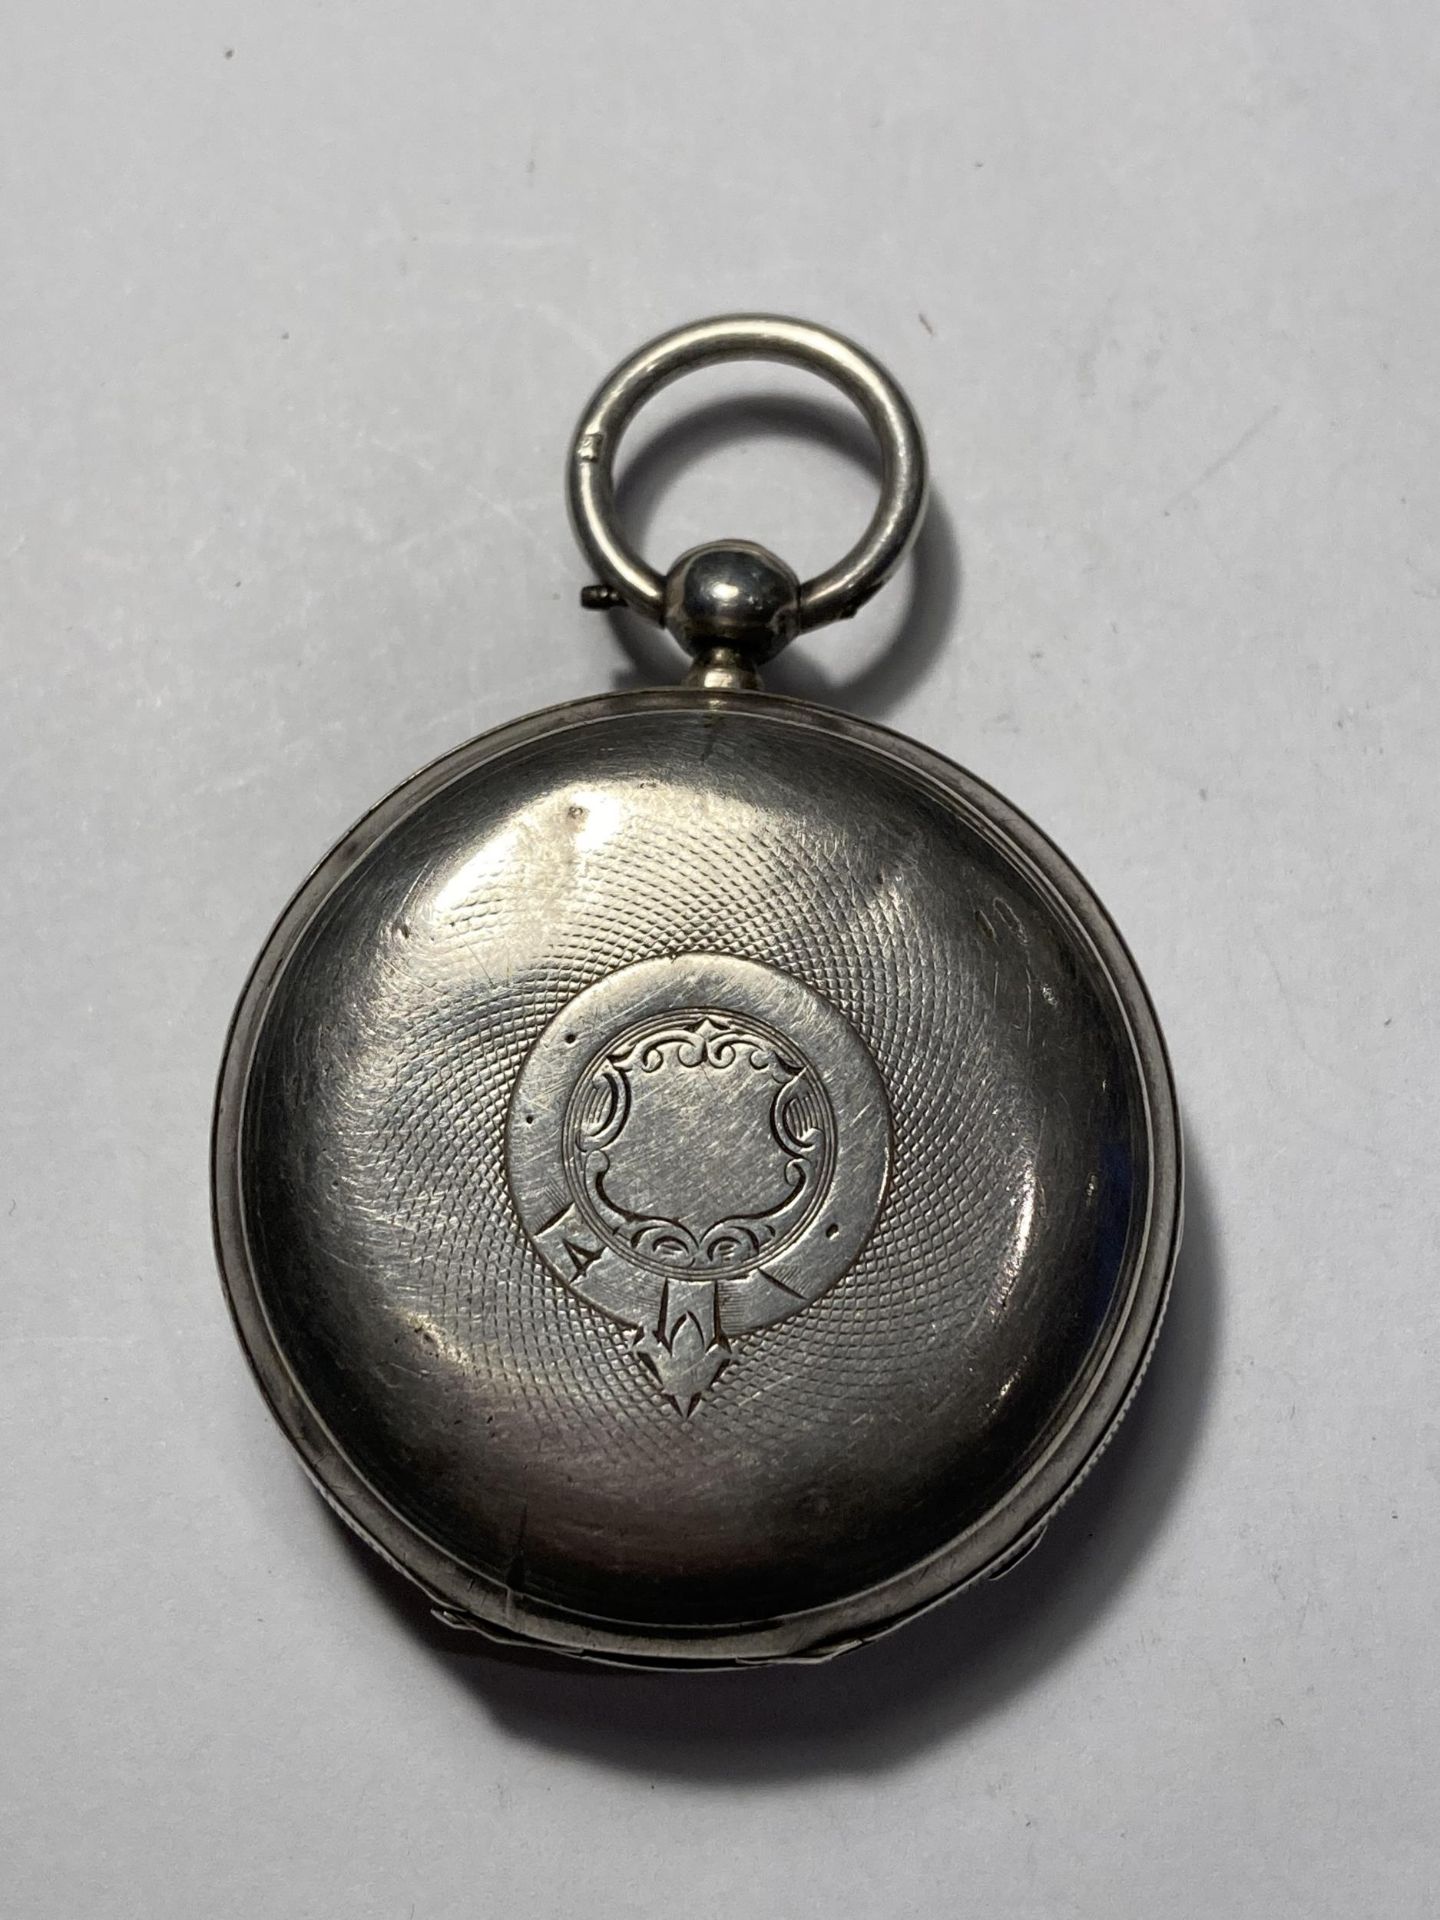 A HALLMARKED BIRMINGHAM SILVER POCKET WATCH, WORKING AT TIME OF LOTTING - Image 2 of 3